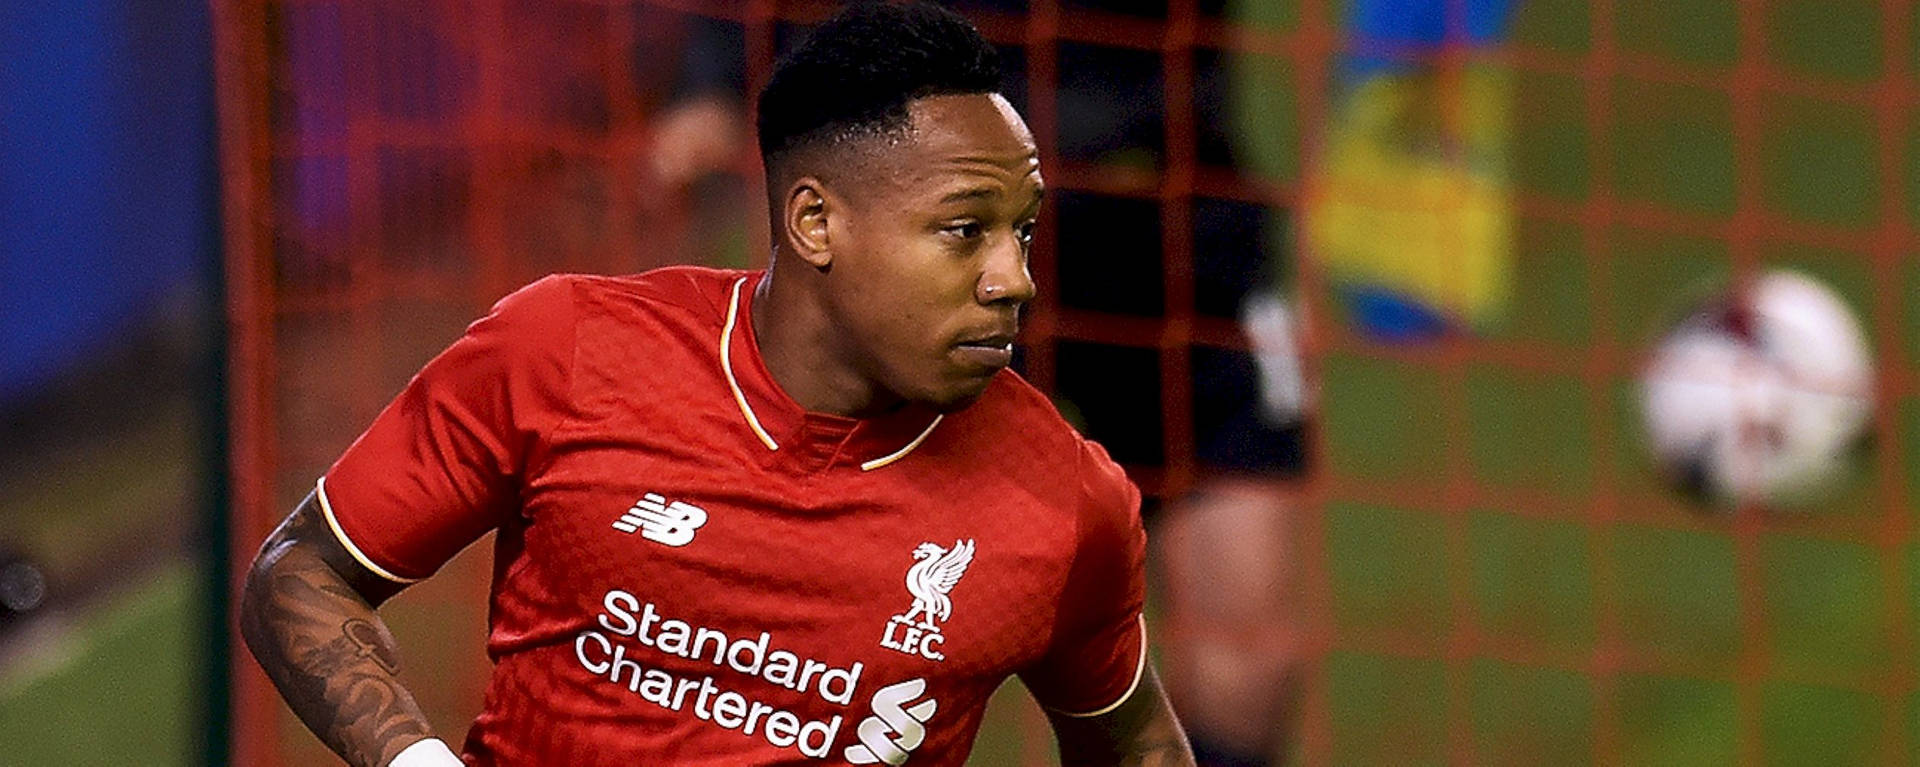 Nathaniel Clyne In Front Of Net Wallpaper